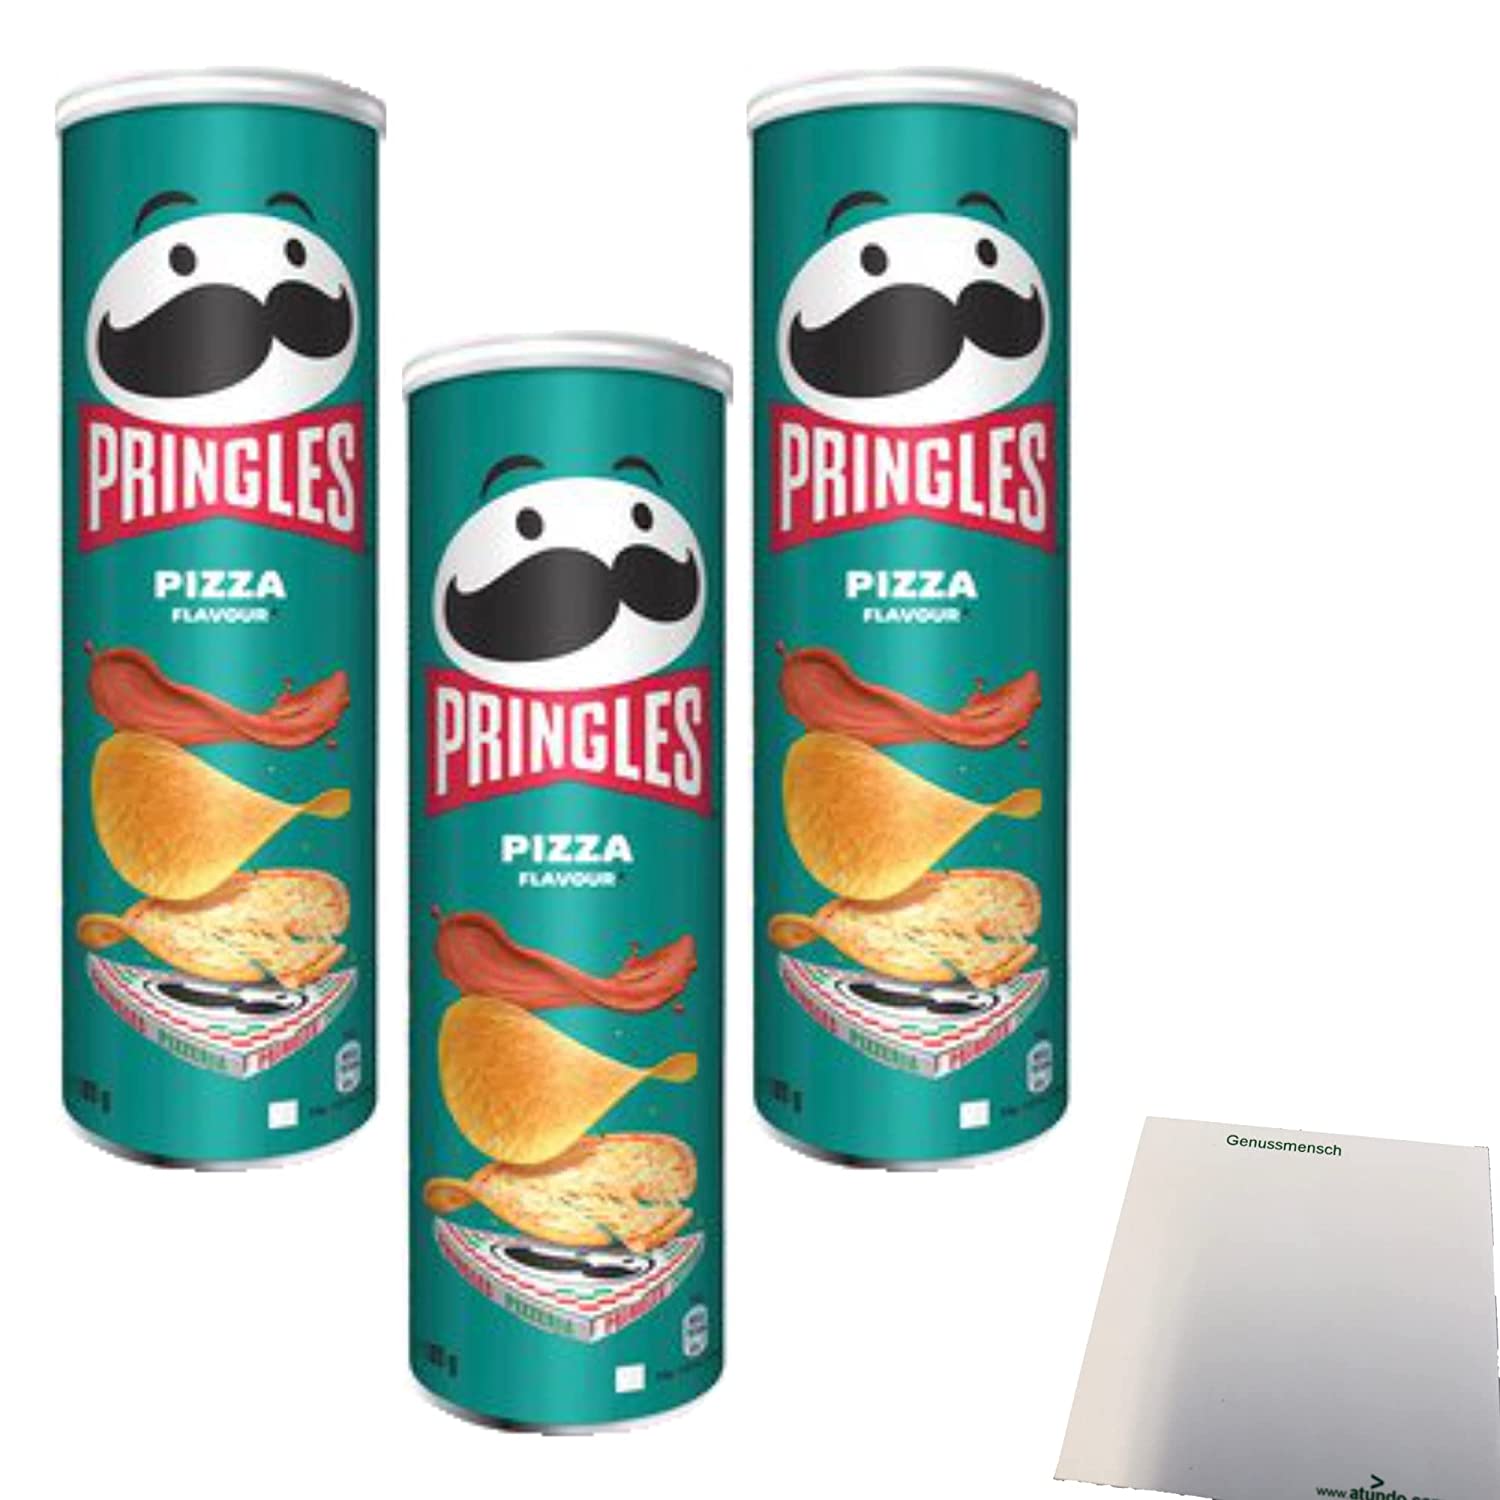 Pringles Pizza Flavour 3er Pack (3x185g Packung) + usy Block